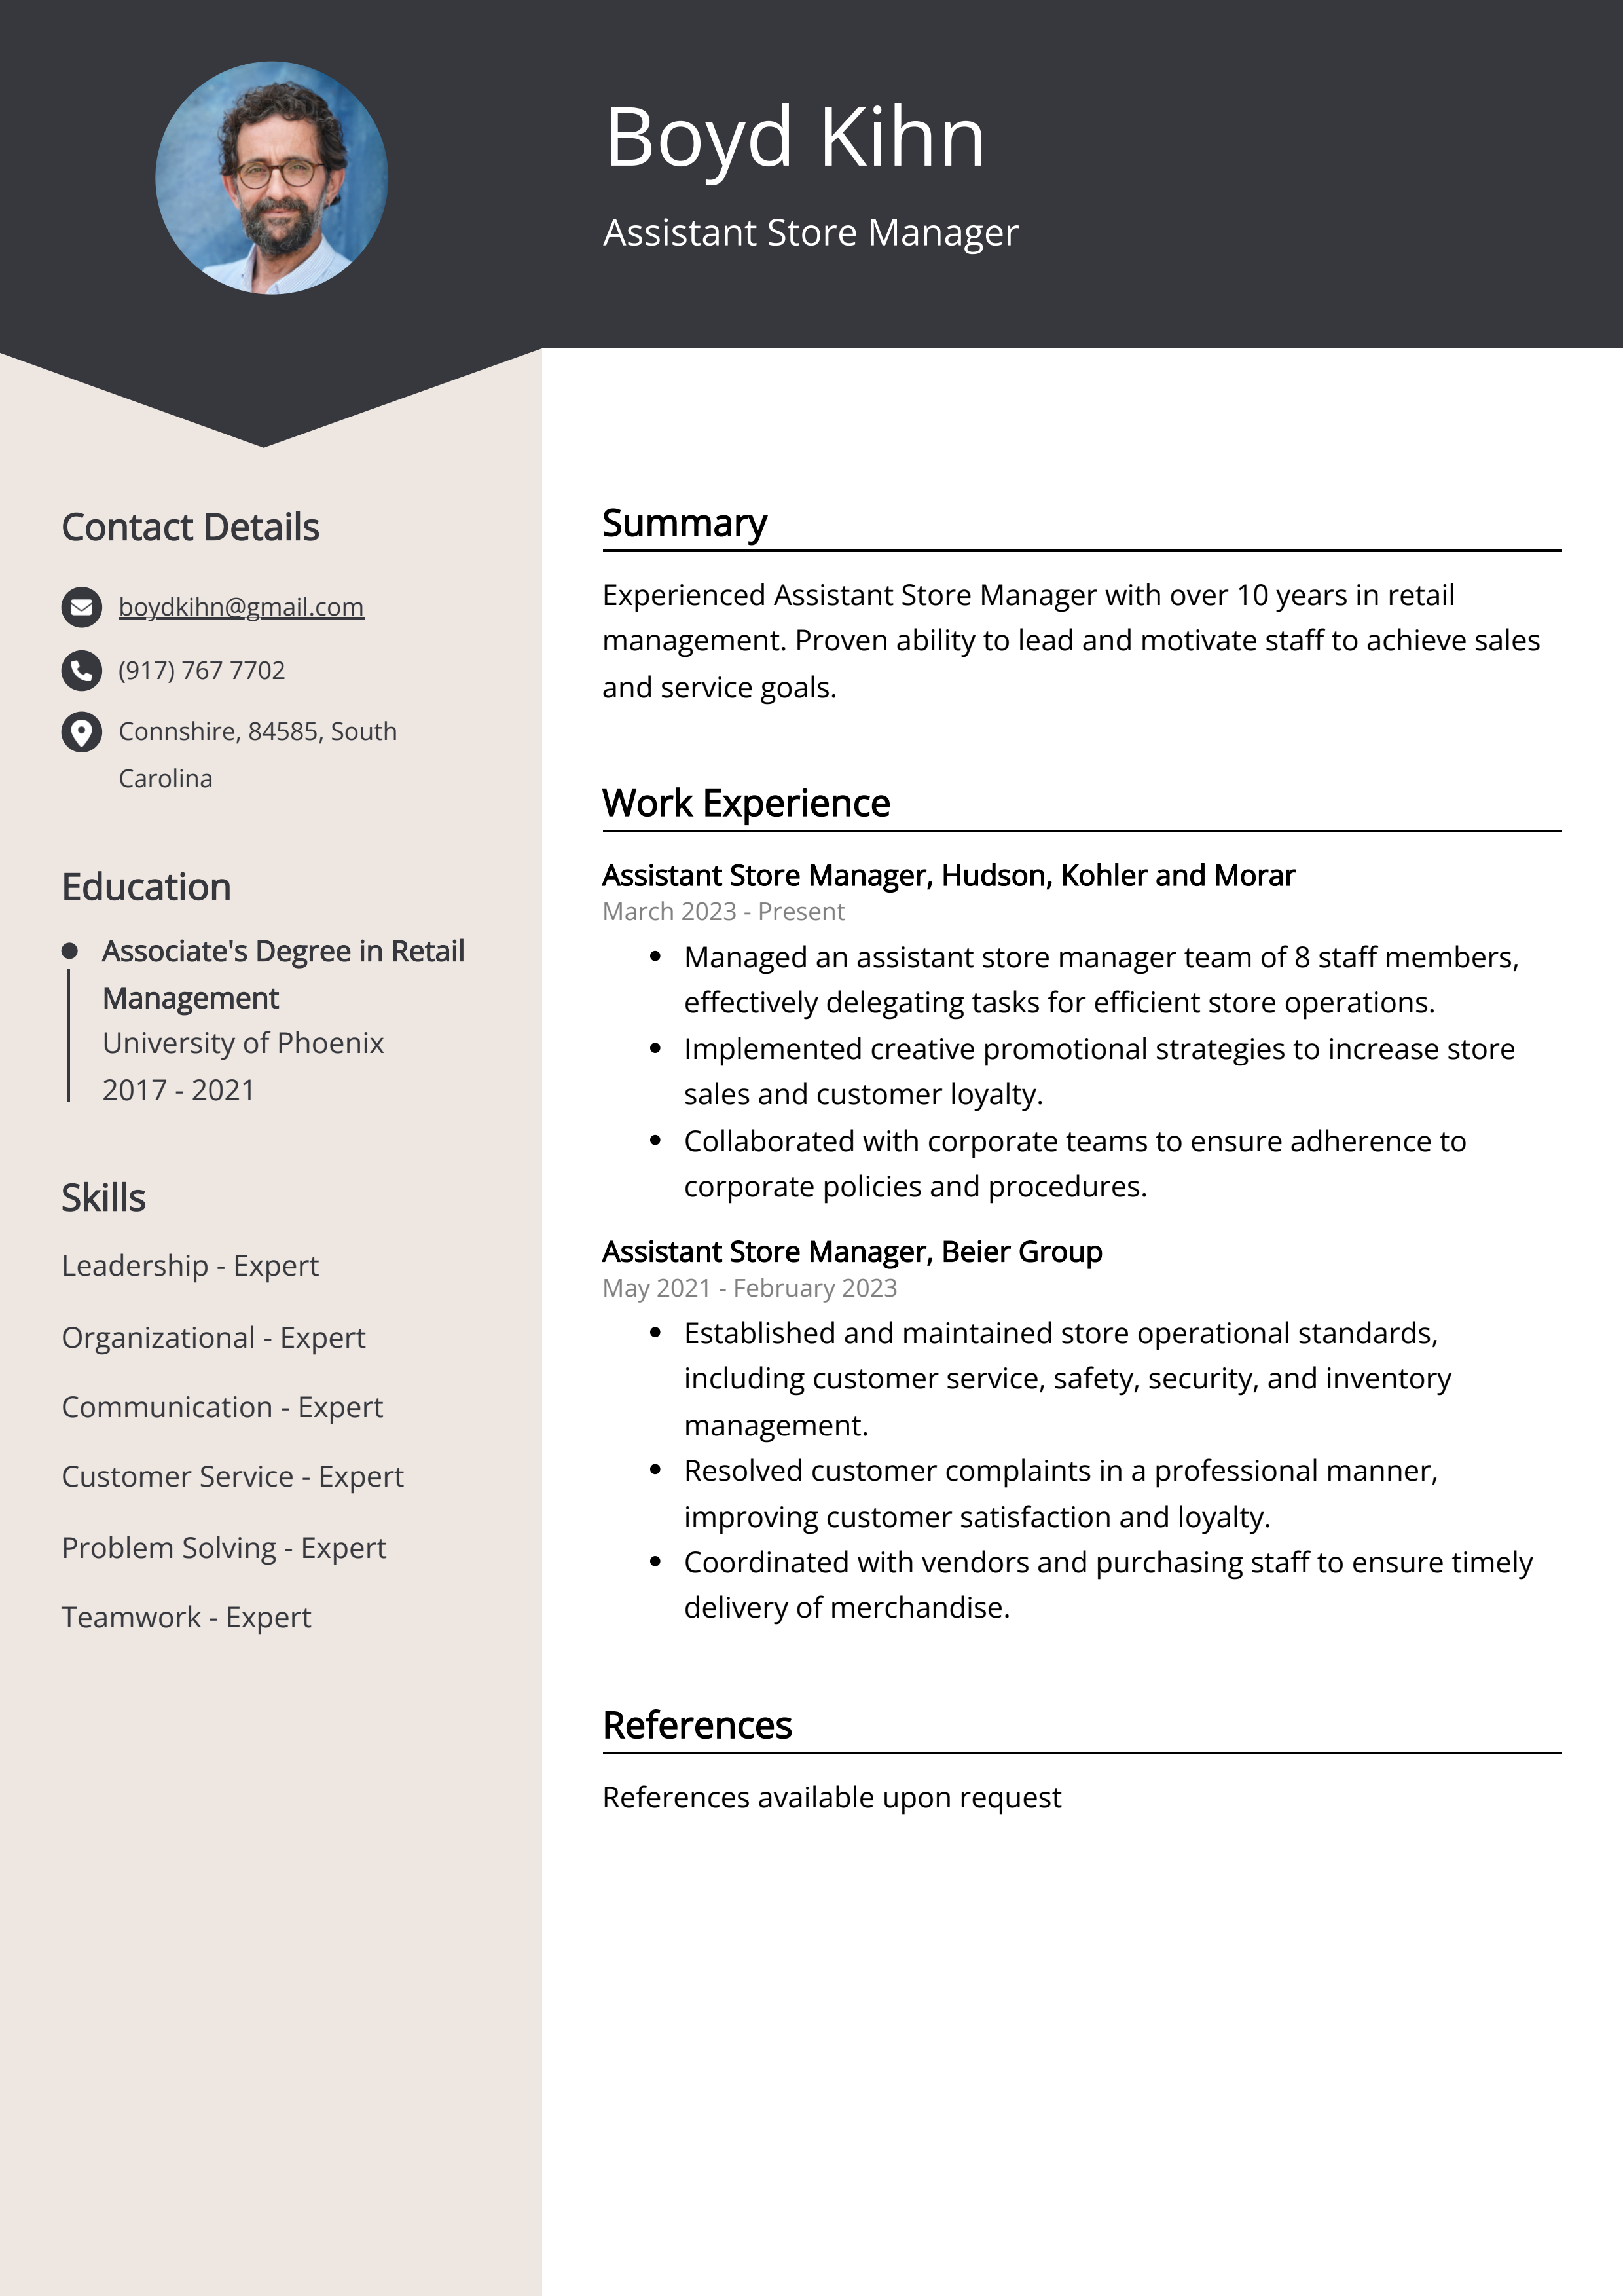 Assistant Store Manager CV Example